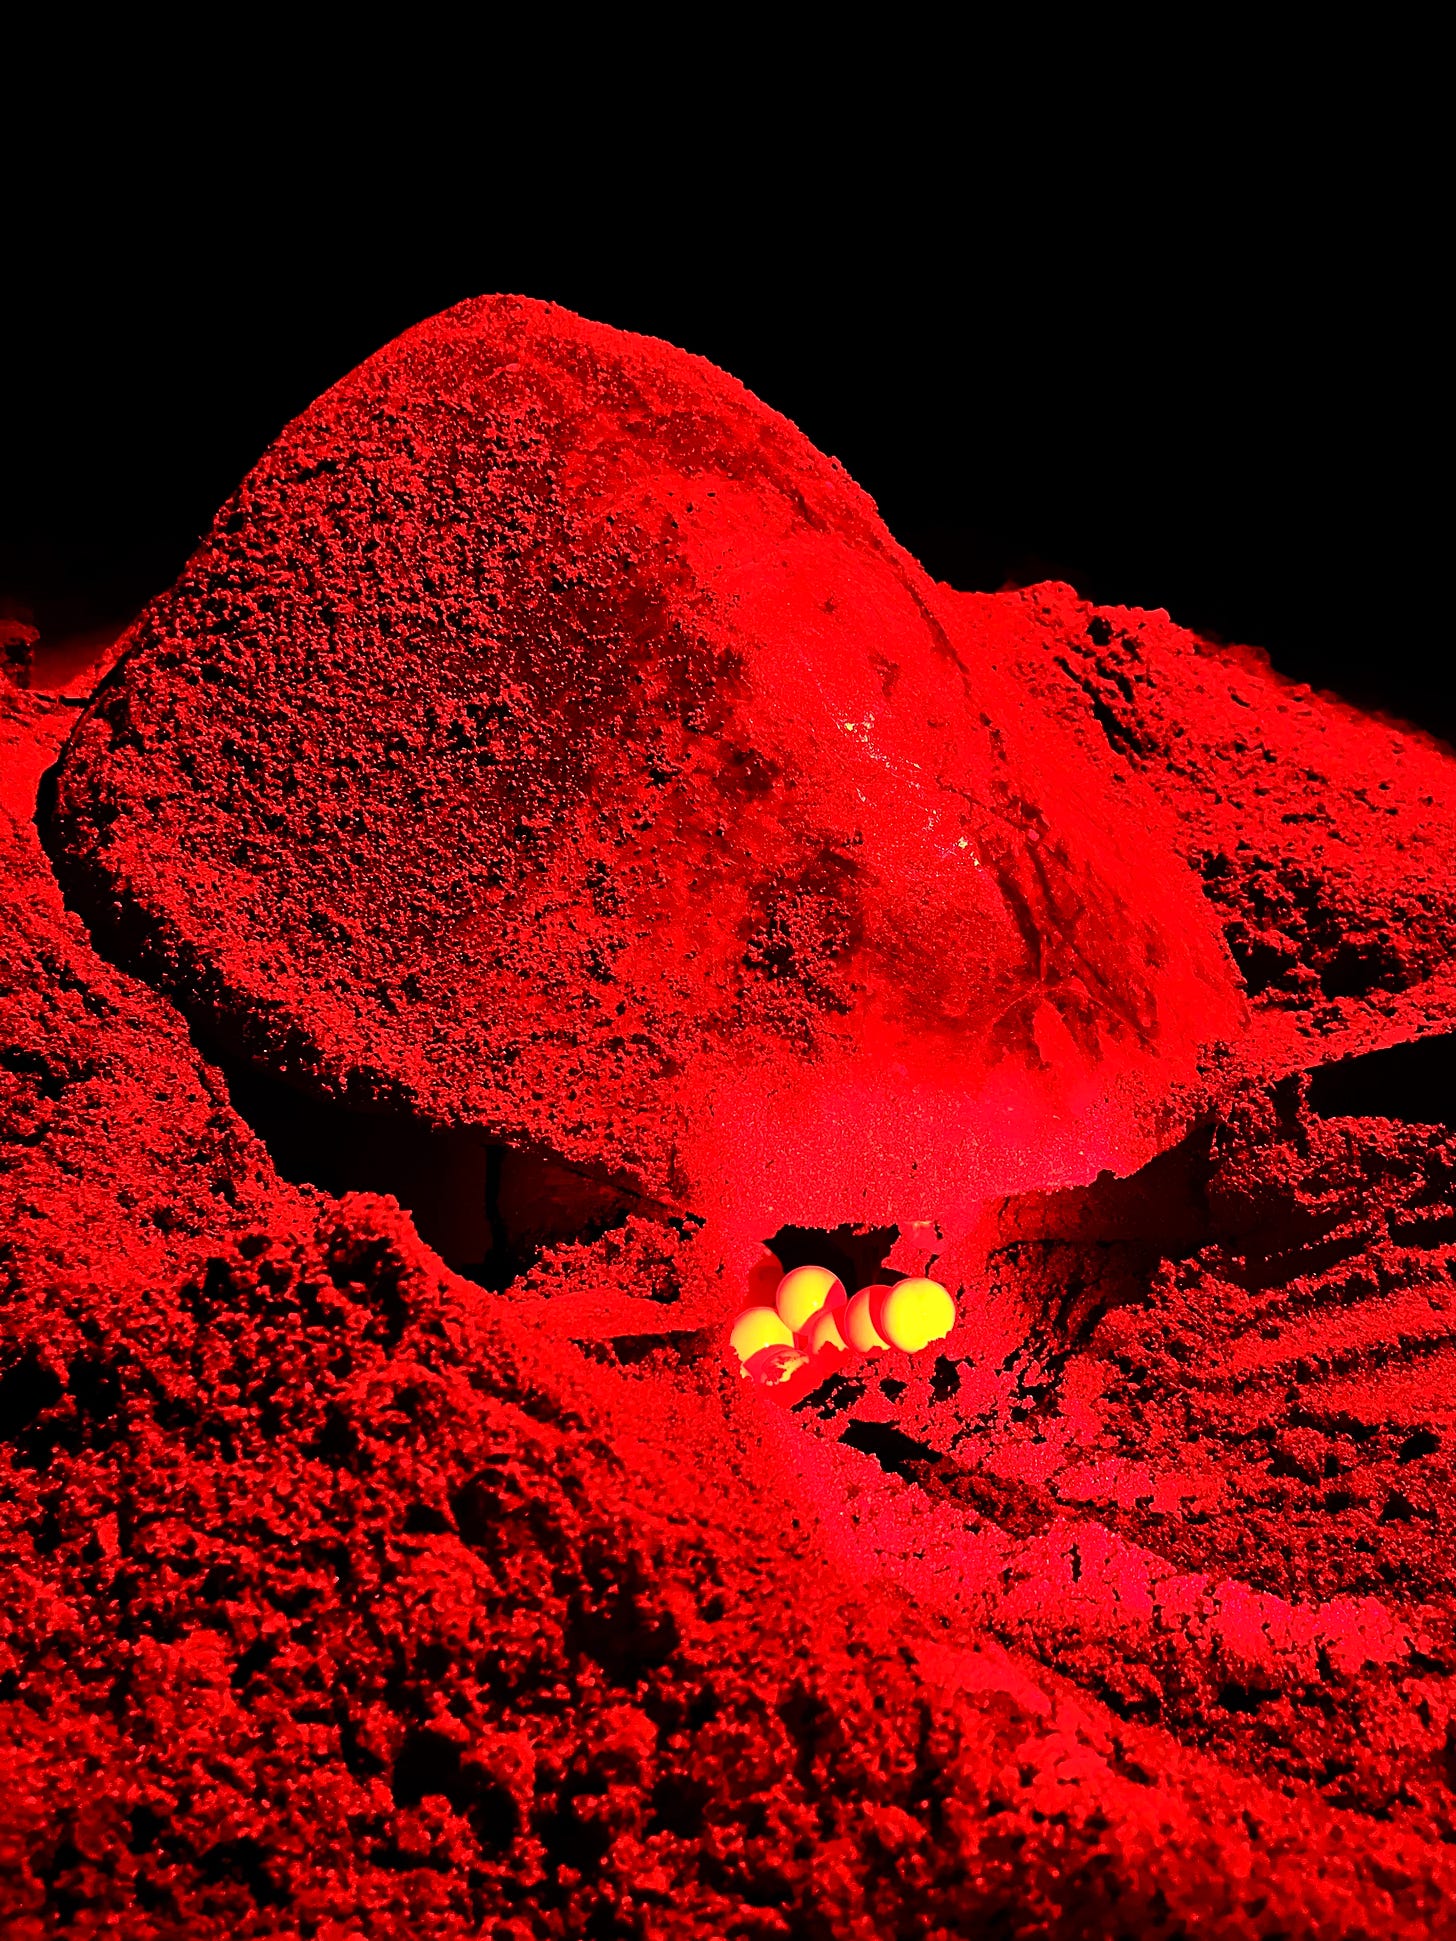 turtle with eggs under red light